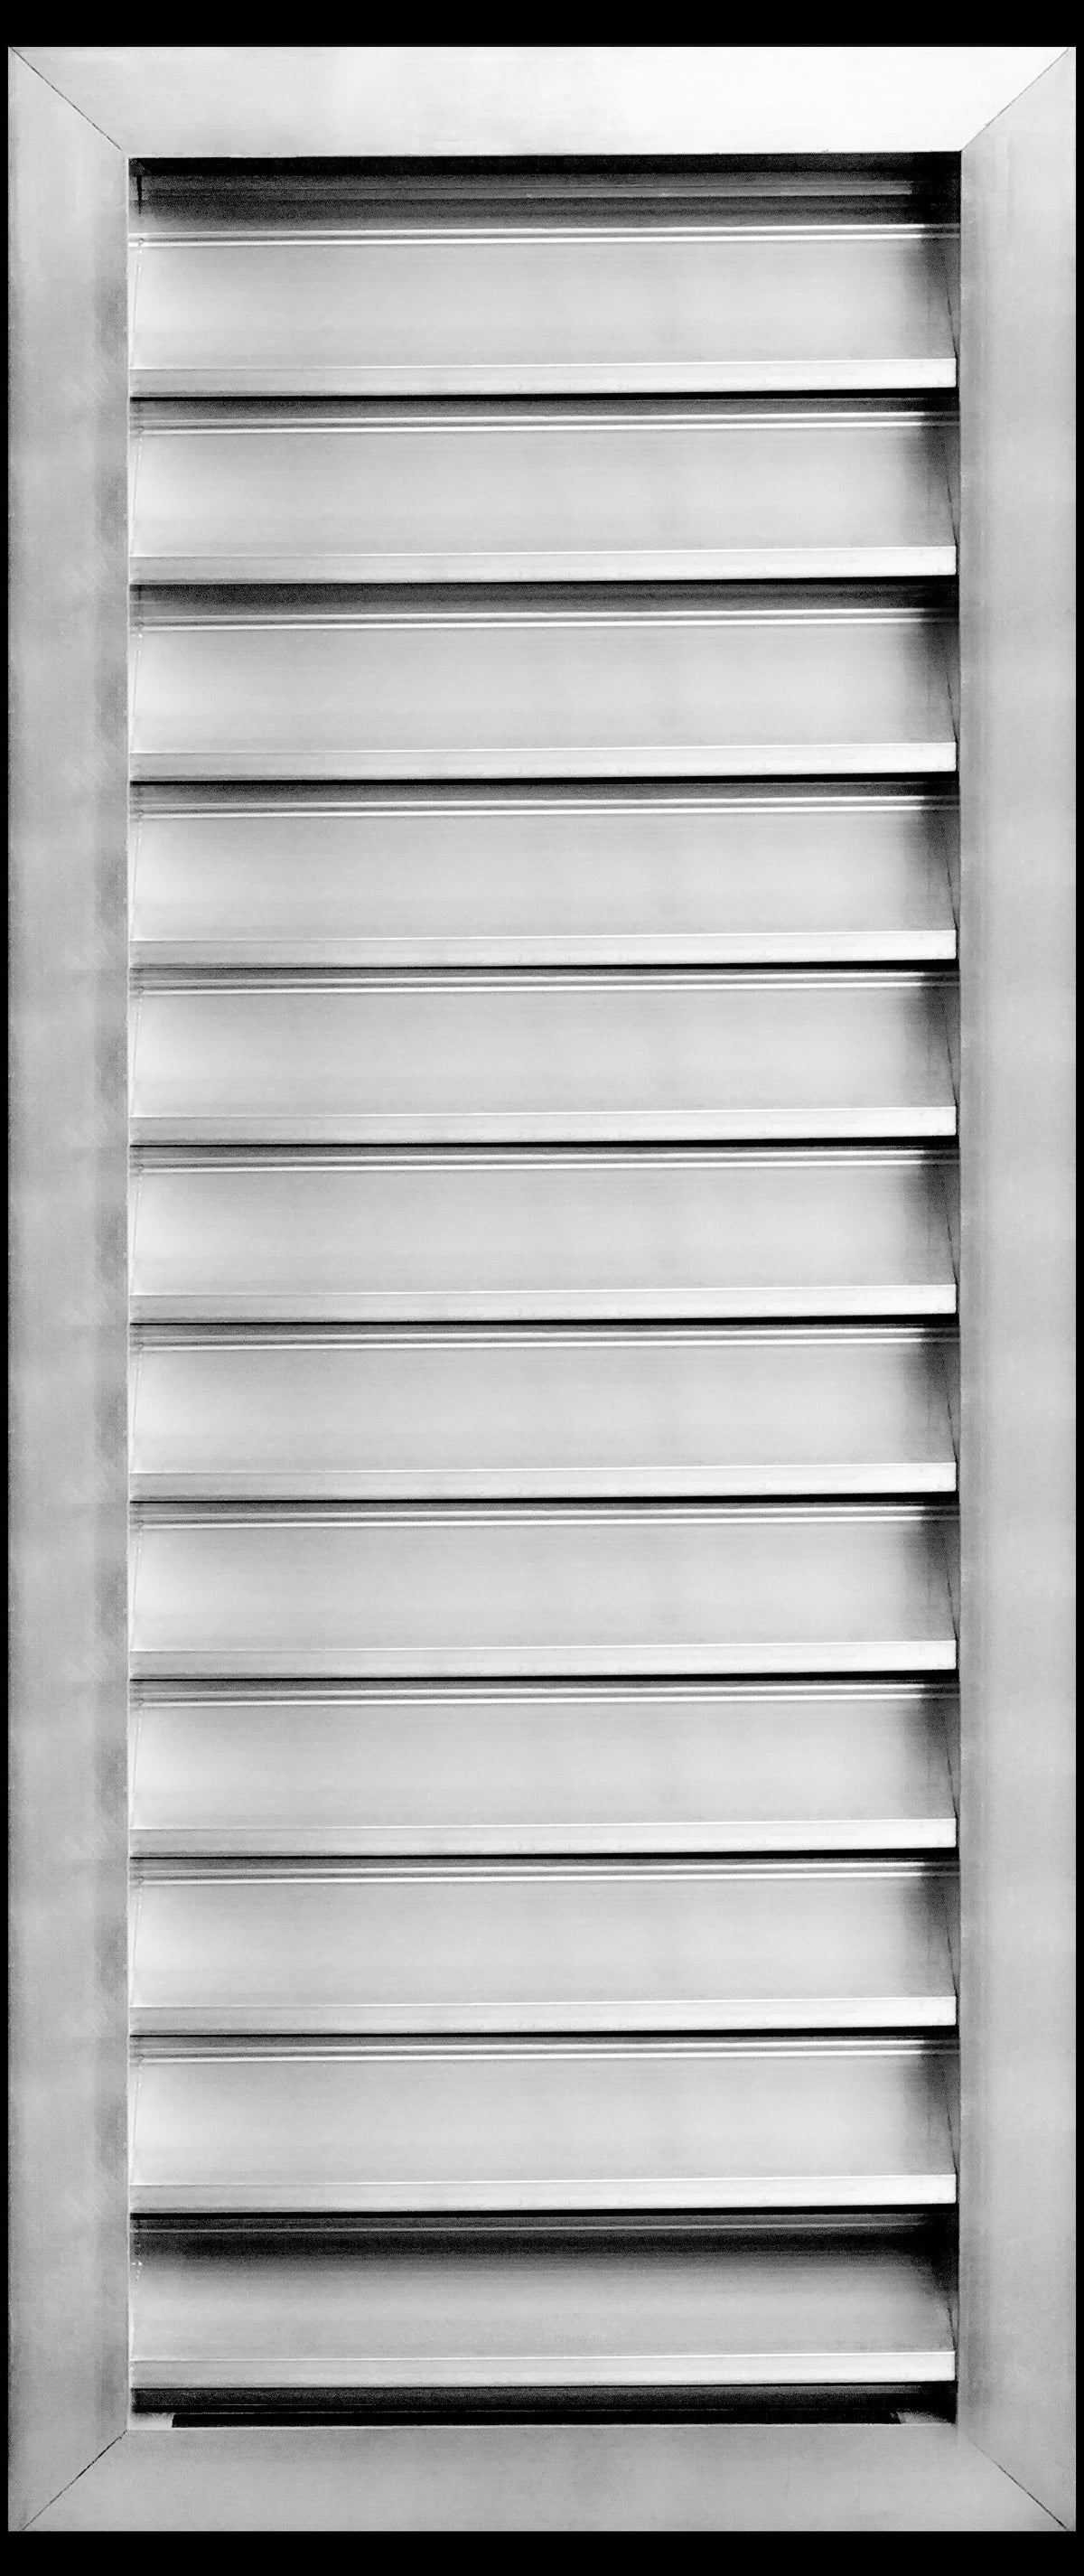 10&quot;w X 30&quot;h Aluminum Outdoor Weather Proof Louvers - Rain &amp; Waterproof Air Vent With Screen Mesh